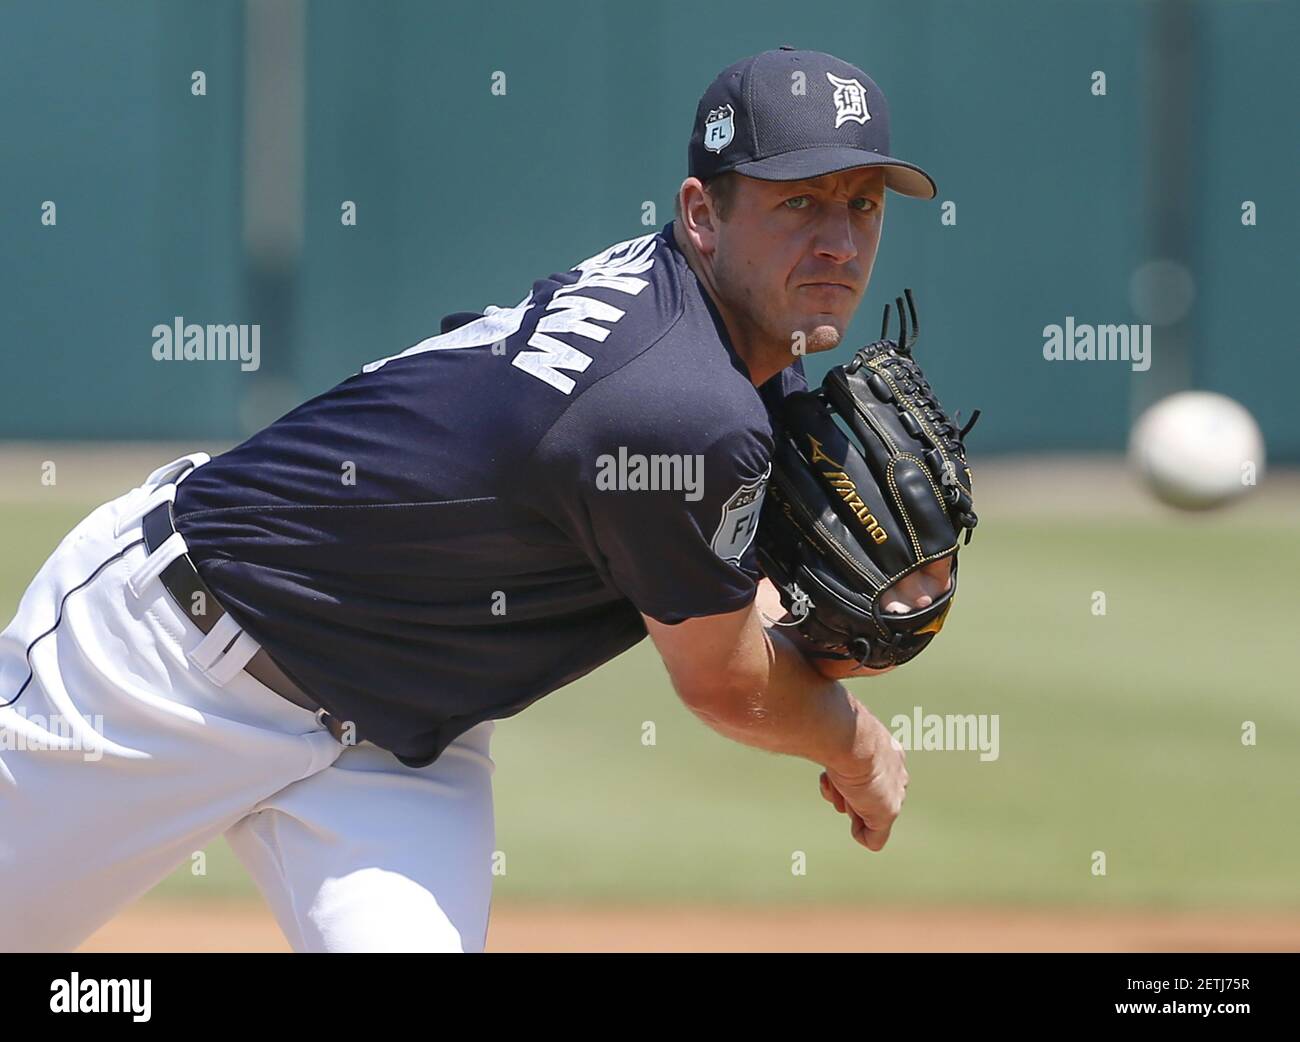 Mar 10, 2017; Lakeland, FL, USA; Detroit Tigers starting pitcher Jordan Zimmermann (27) throws a pitch before the first inning of an MLB spring training baseball game against the Toronto Blue Jays at Joker Marchant Stadium. Mandatory Credit: Reinhold Matay-USA TODAY Sports *** Please Use Credit from Credit Field *** Stock Photo